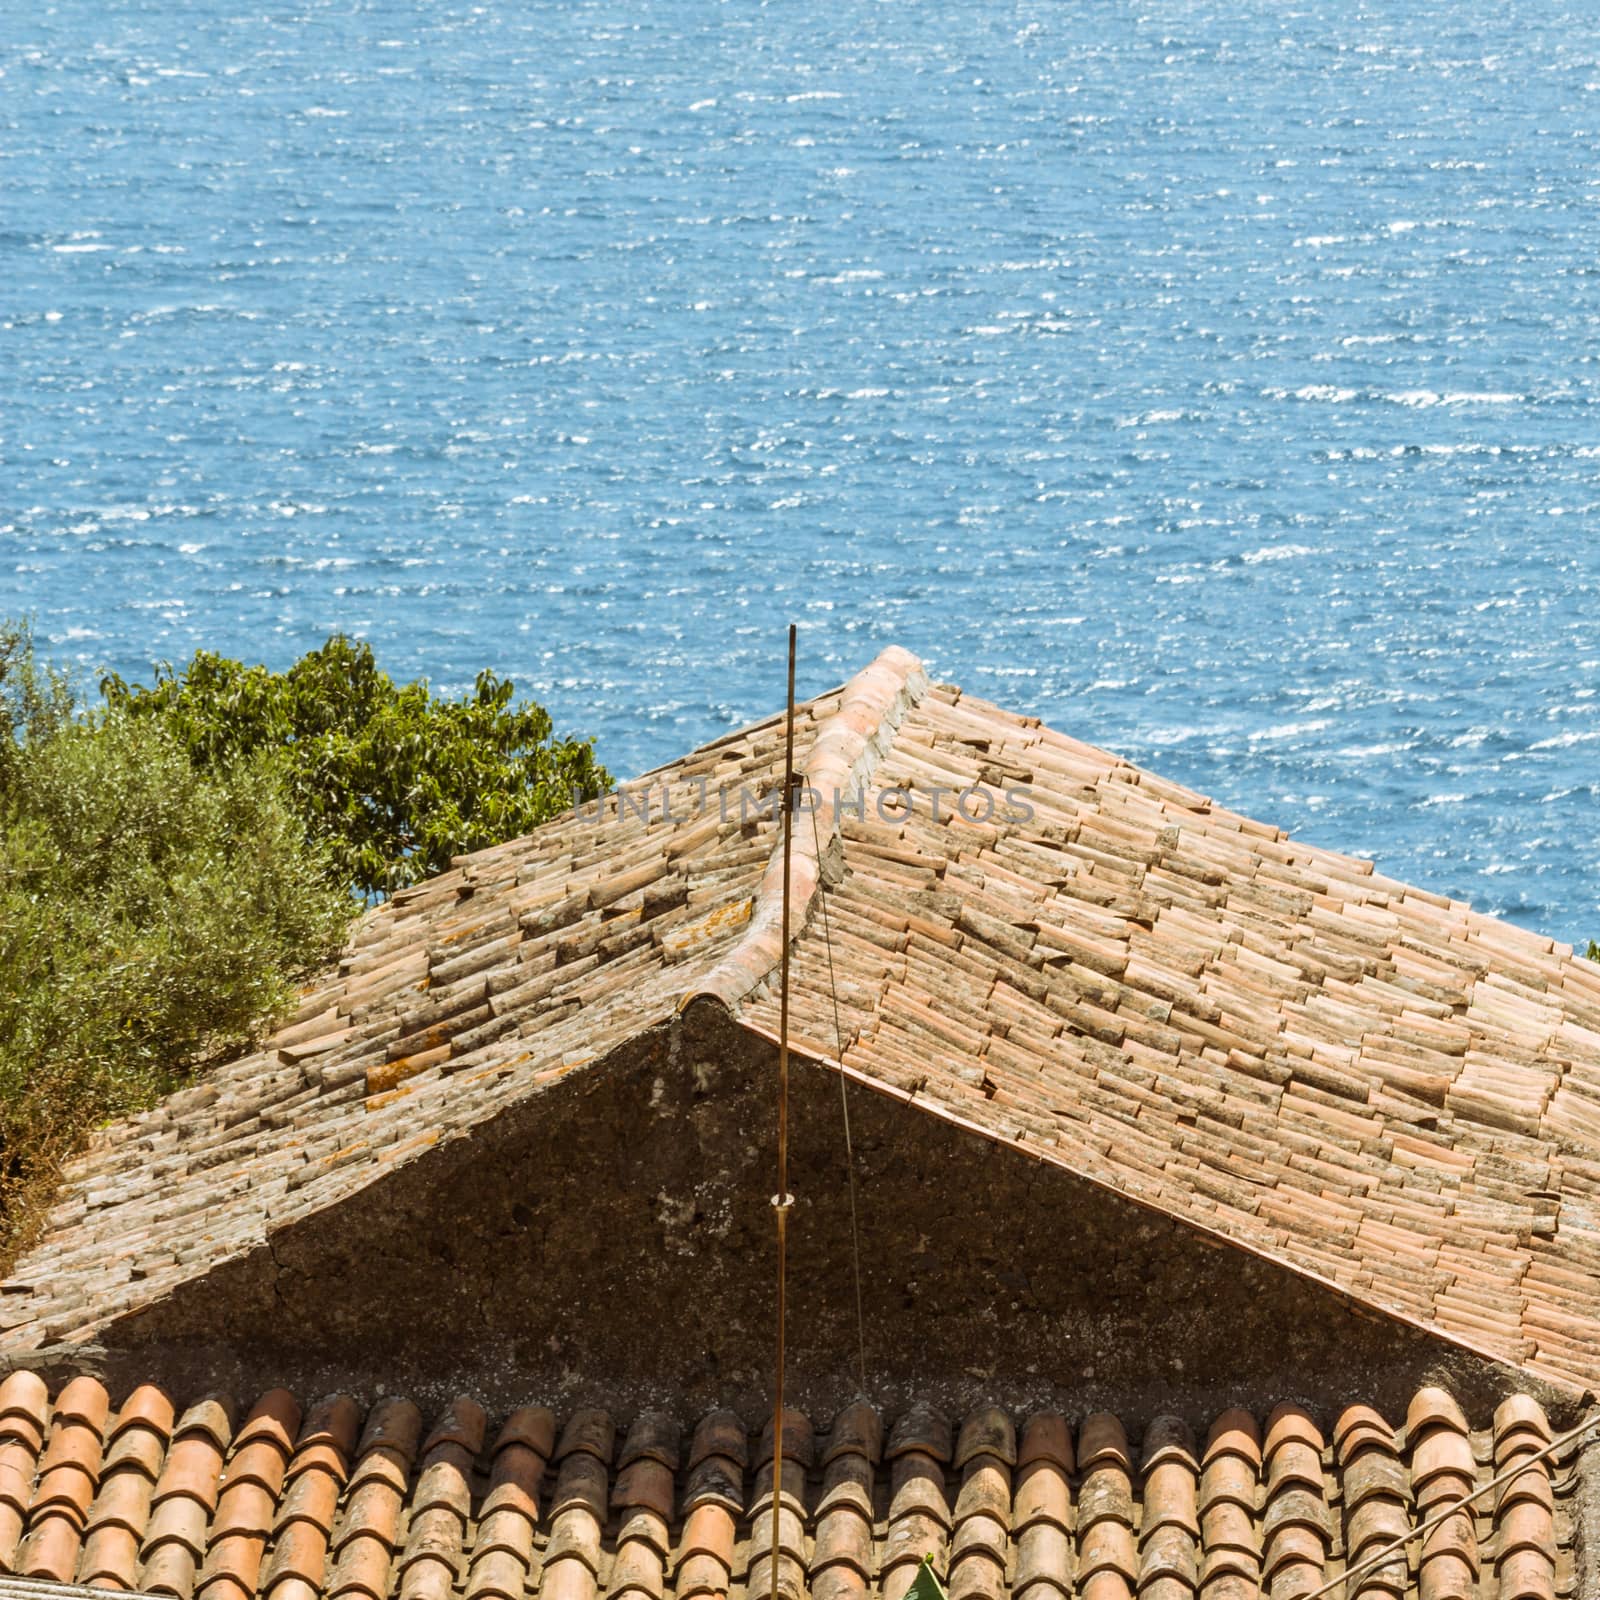 The beautiful Sicilian coast with ancient summer residences